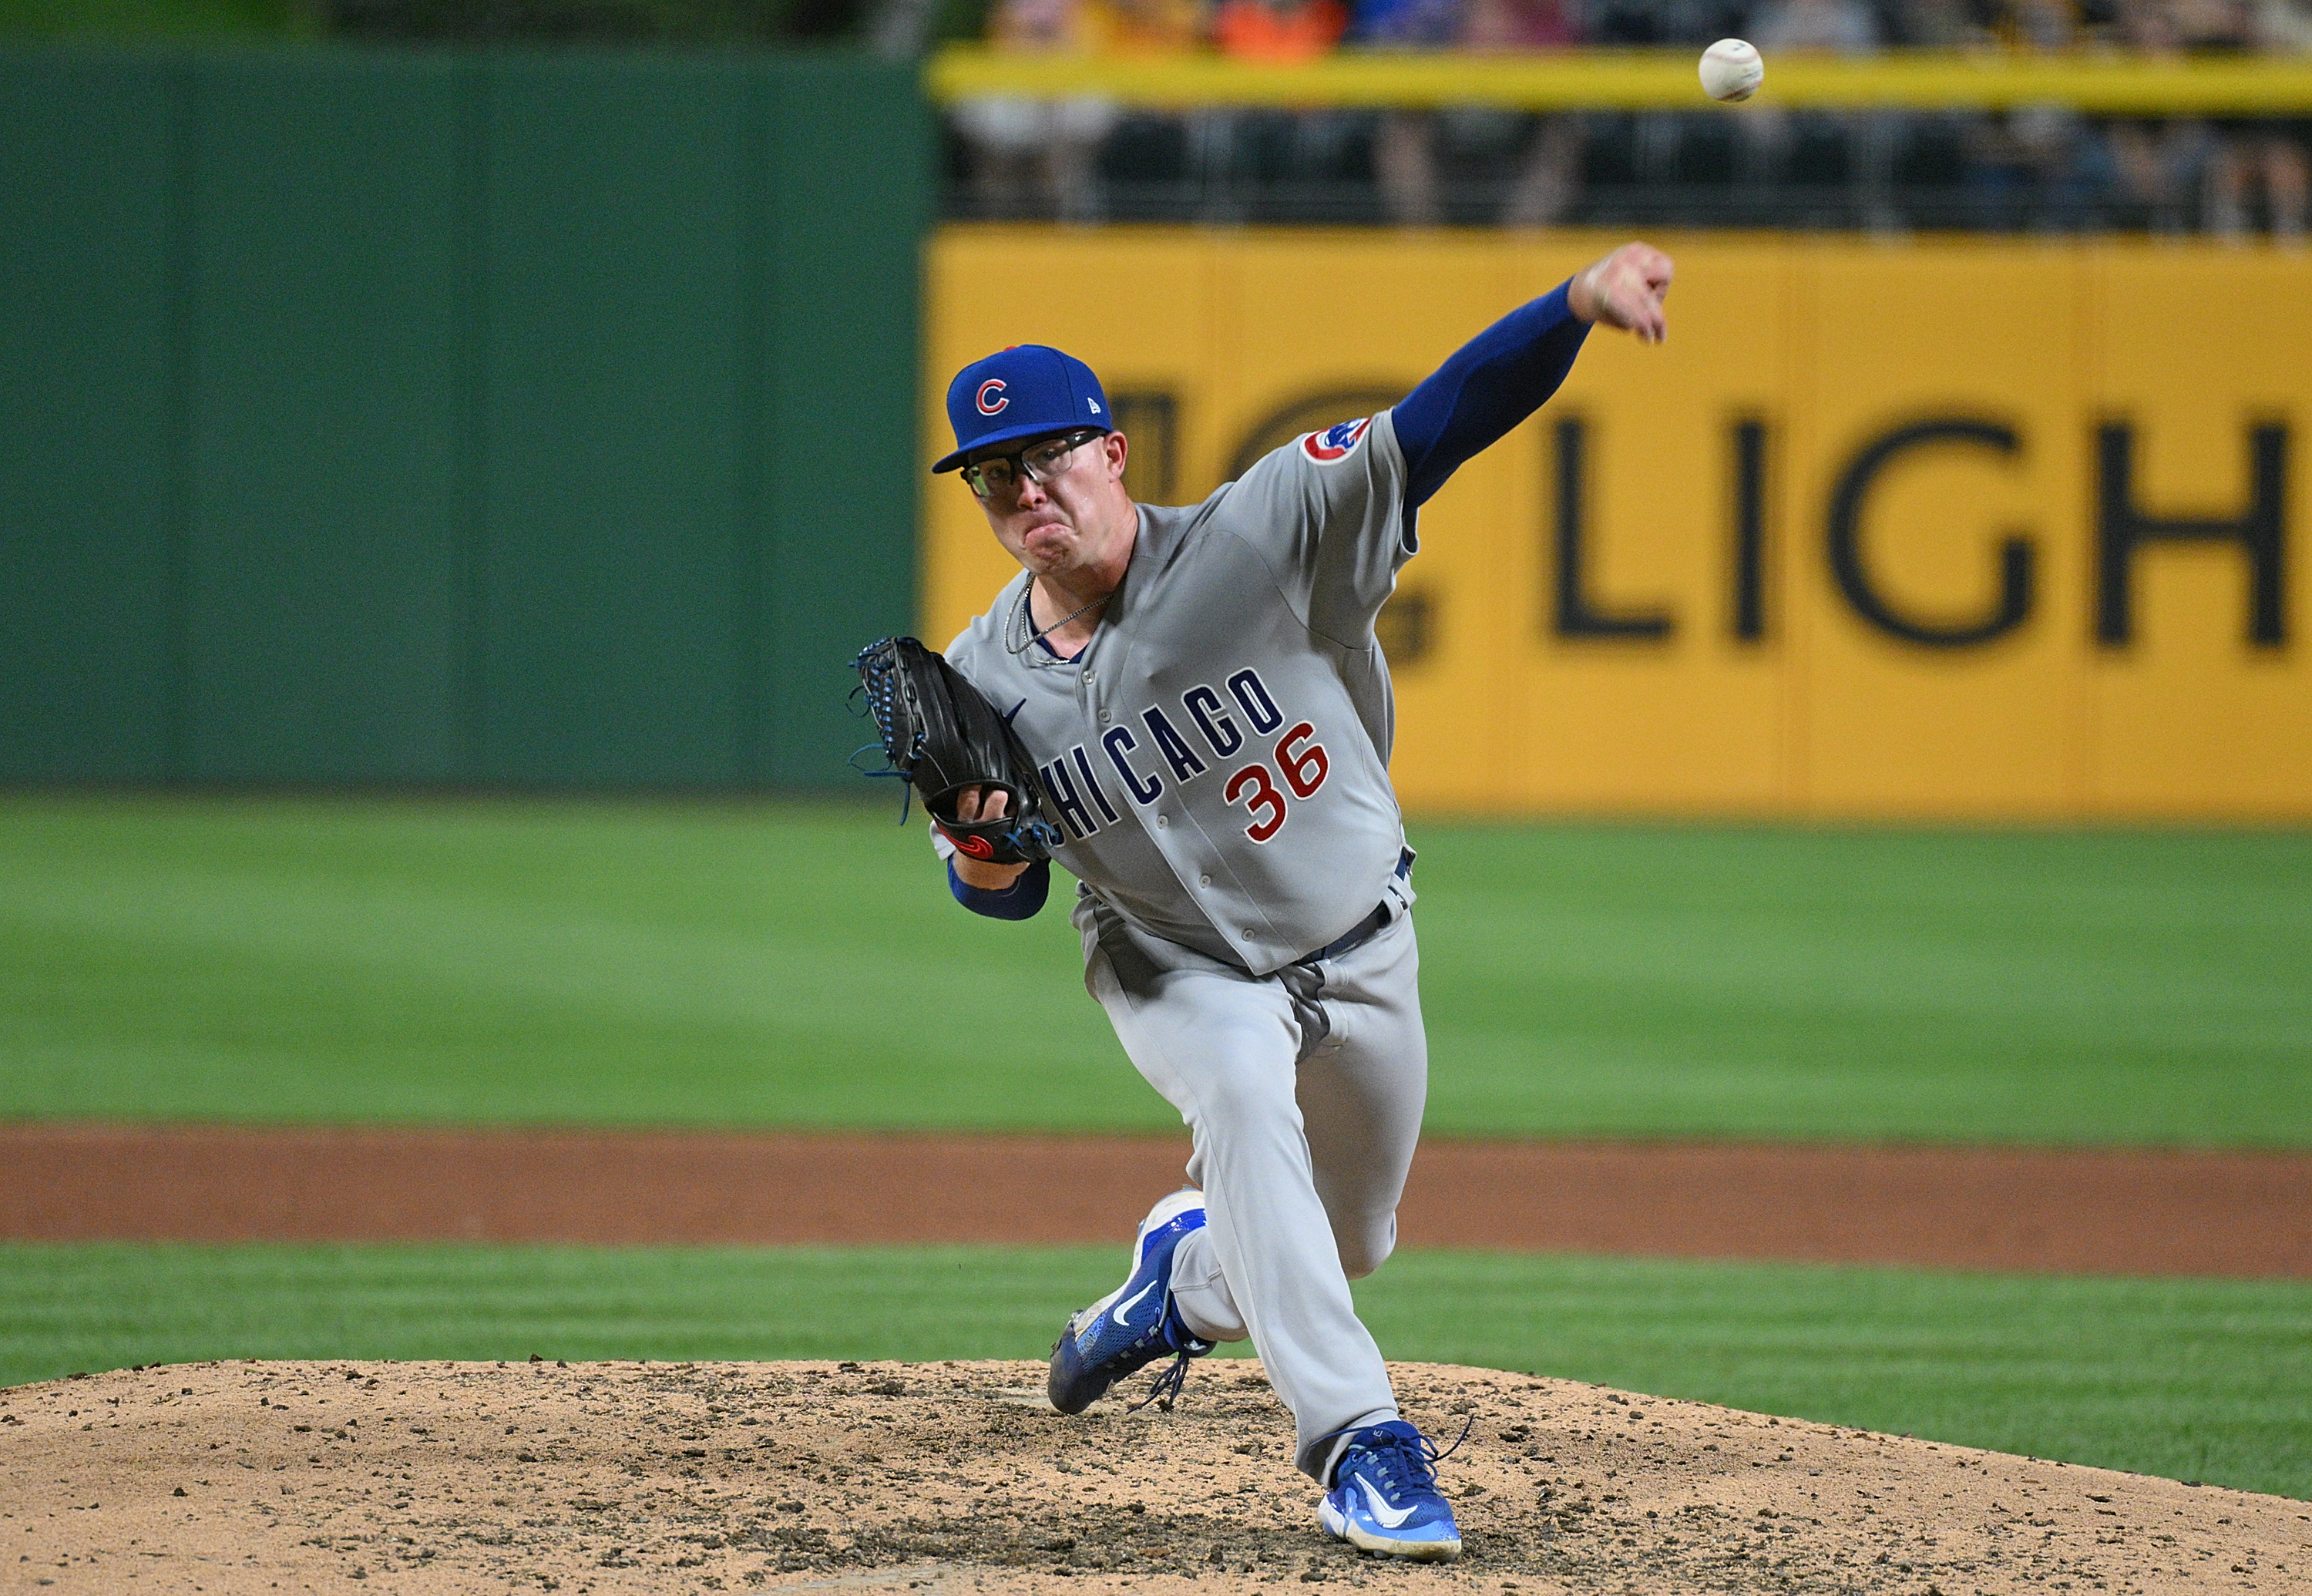 Chicago Cubs: Historically Bad Pitching Performance so Far